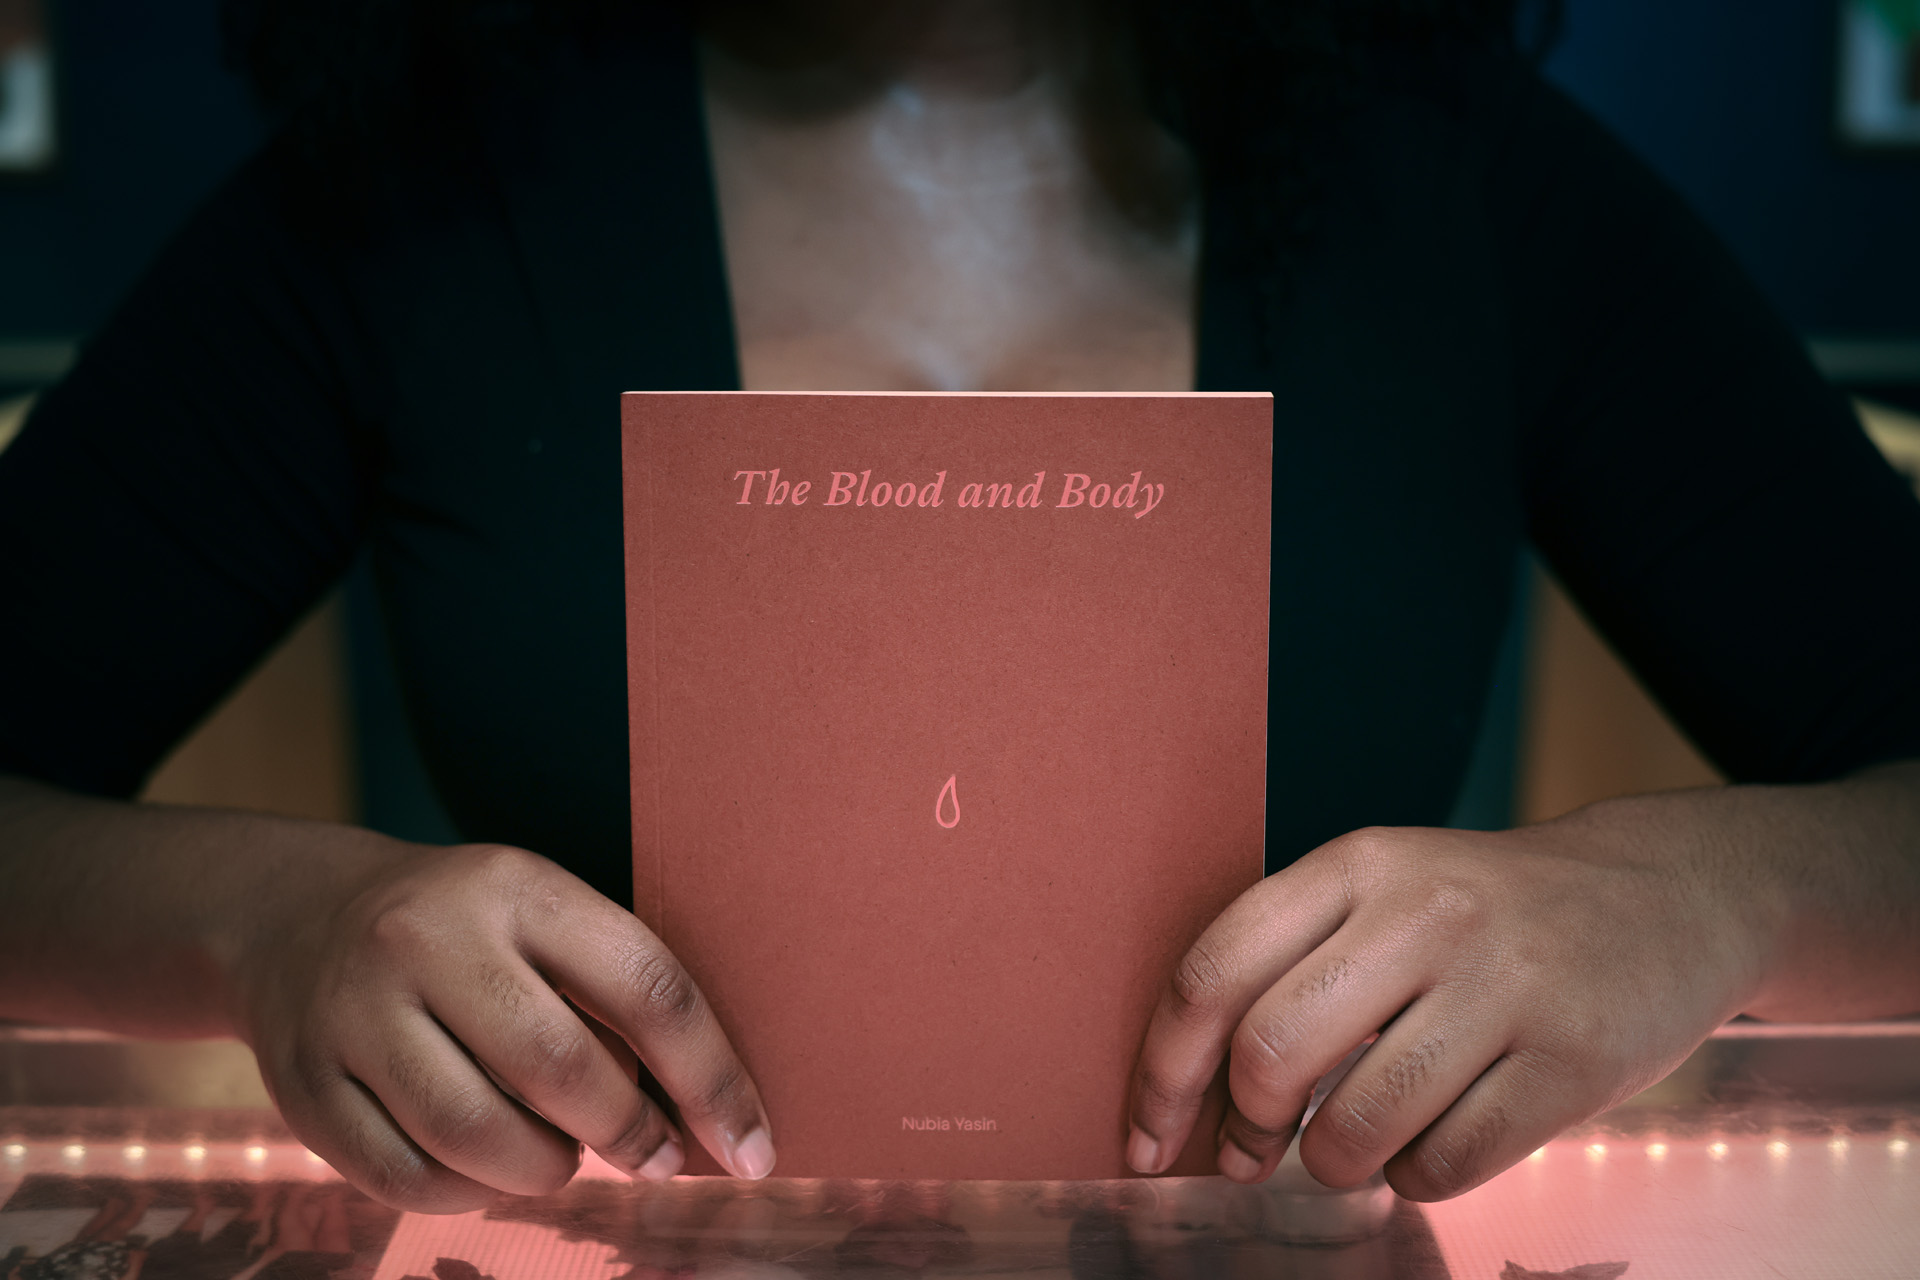 The Blood and Body by Nubia Yasin